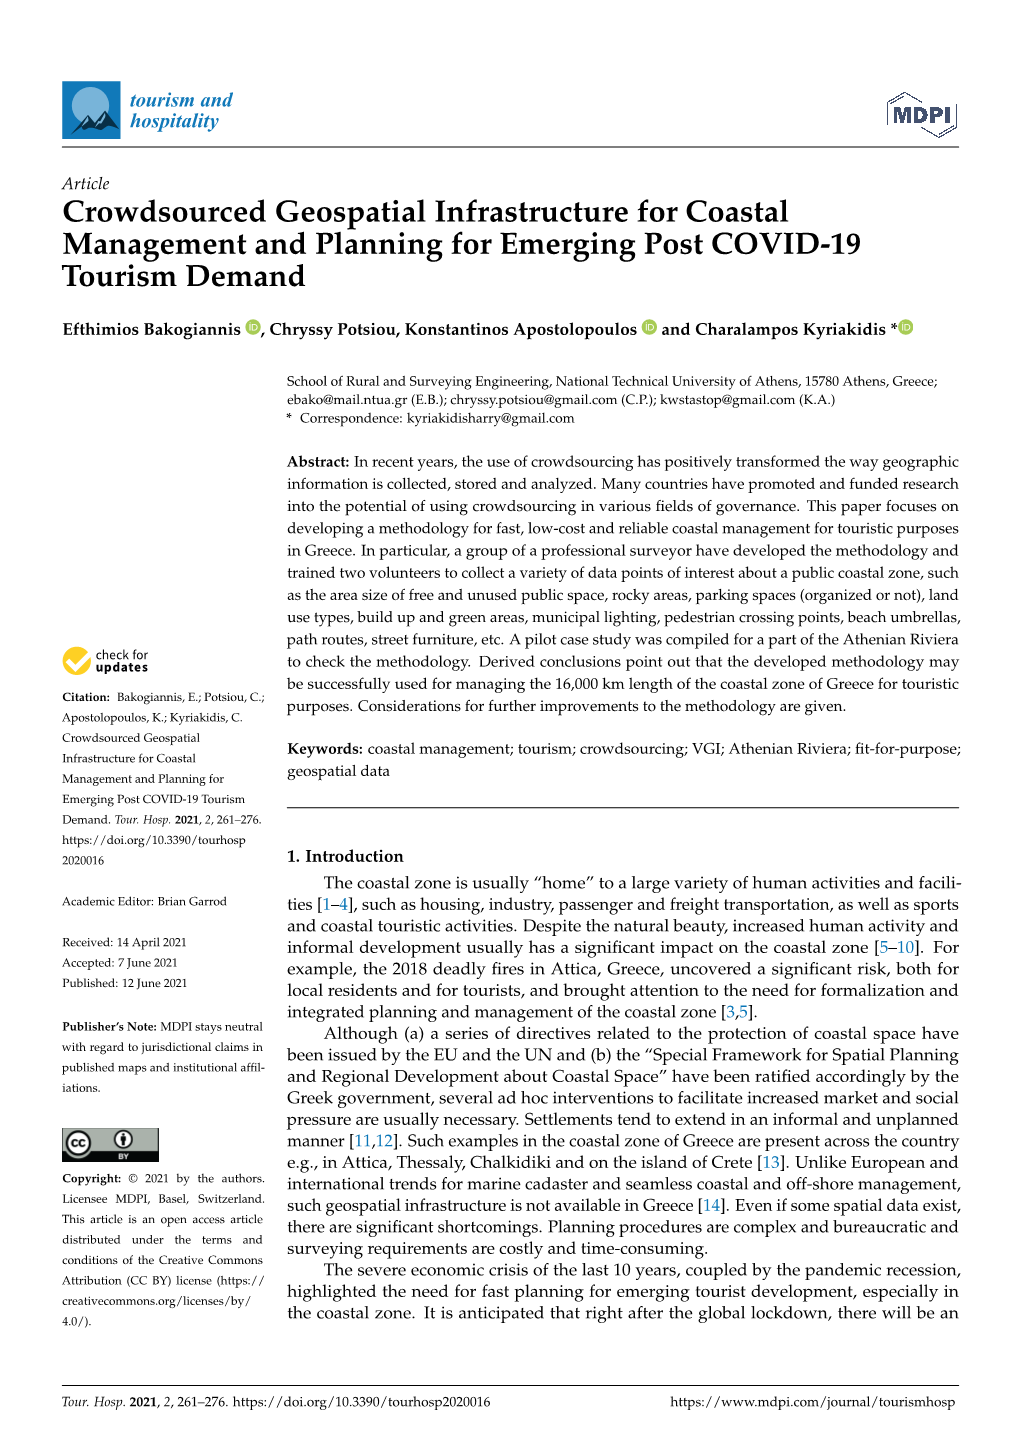 Crowdsourced Geospatial Infrastructure for Coastal Management and Planning for Emerging Post COVID-19 Tourism Demand